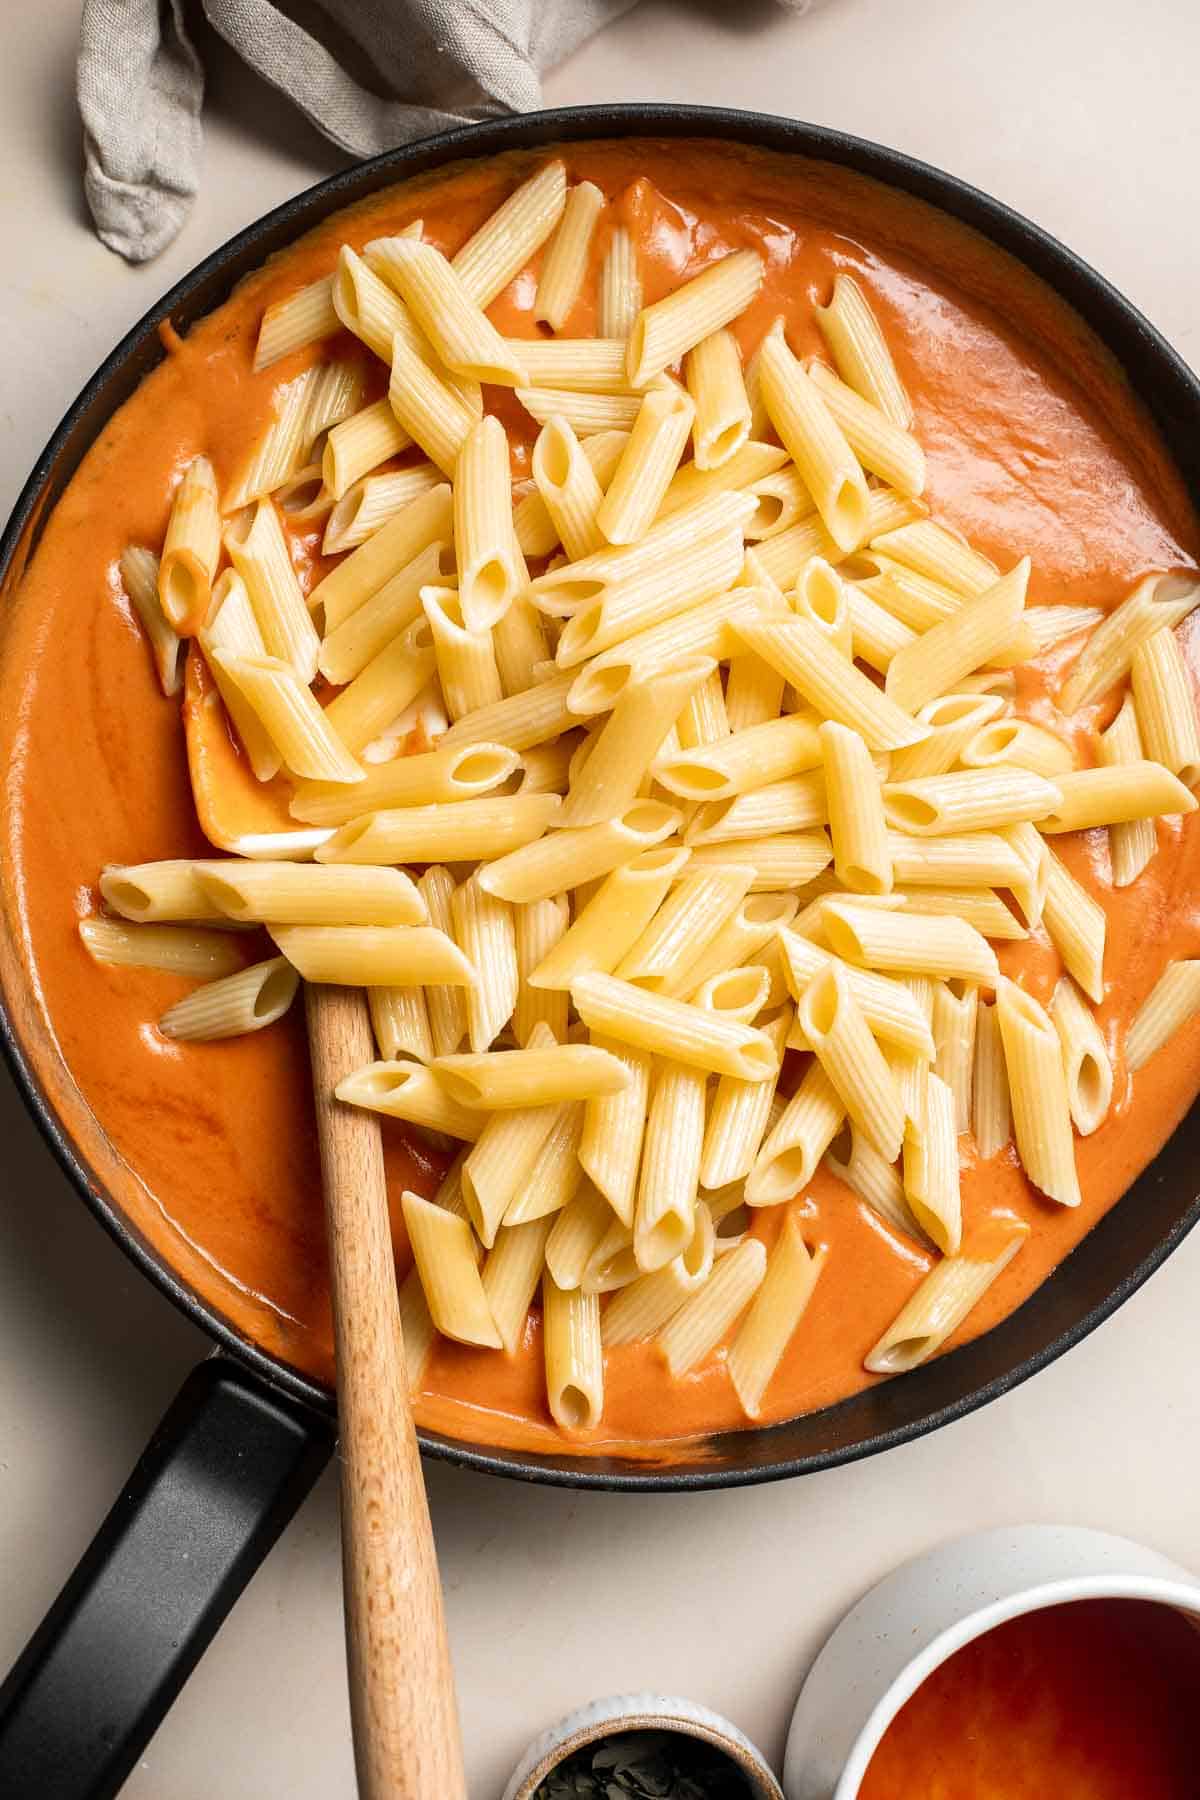 This Creamy Tomato Pasta is a simple and delicious meal made from scratch in 25 minutes with a cream and tomato based sauce that is rich and silky smooth. | aheadofthyme.com